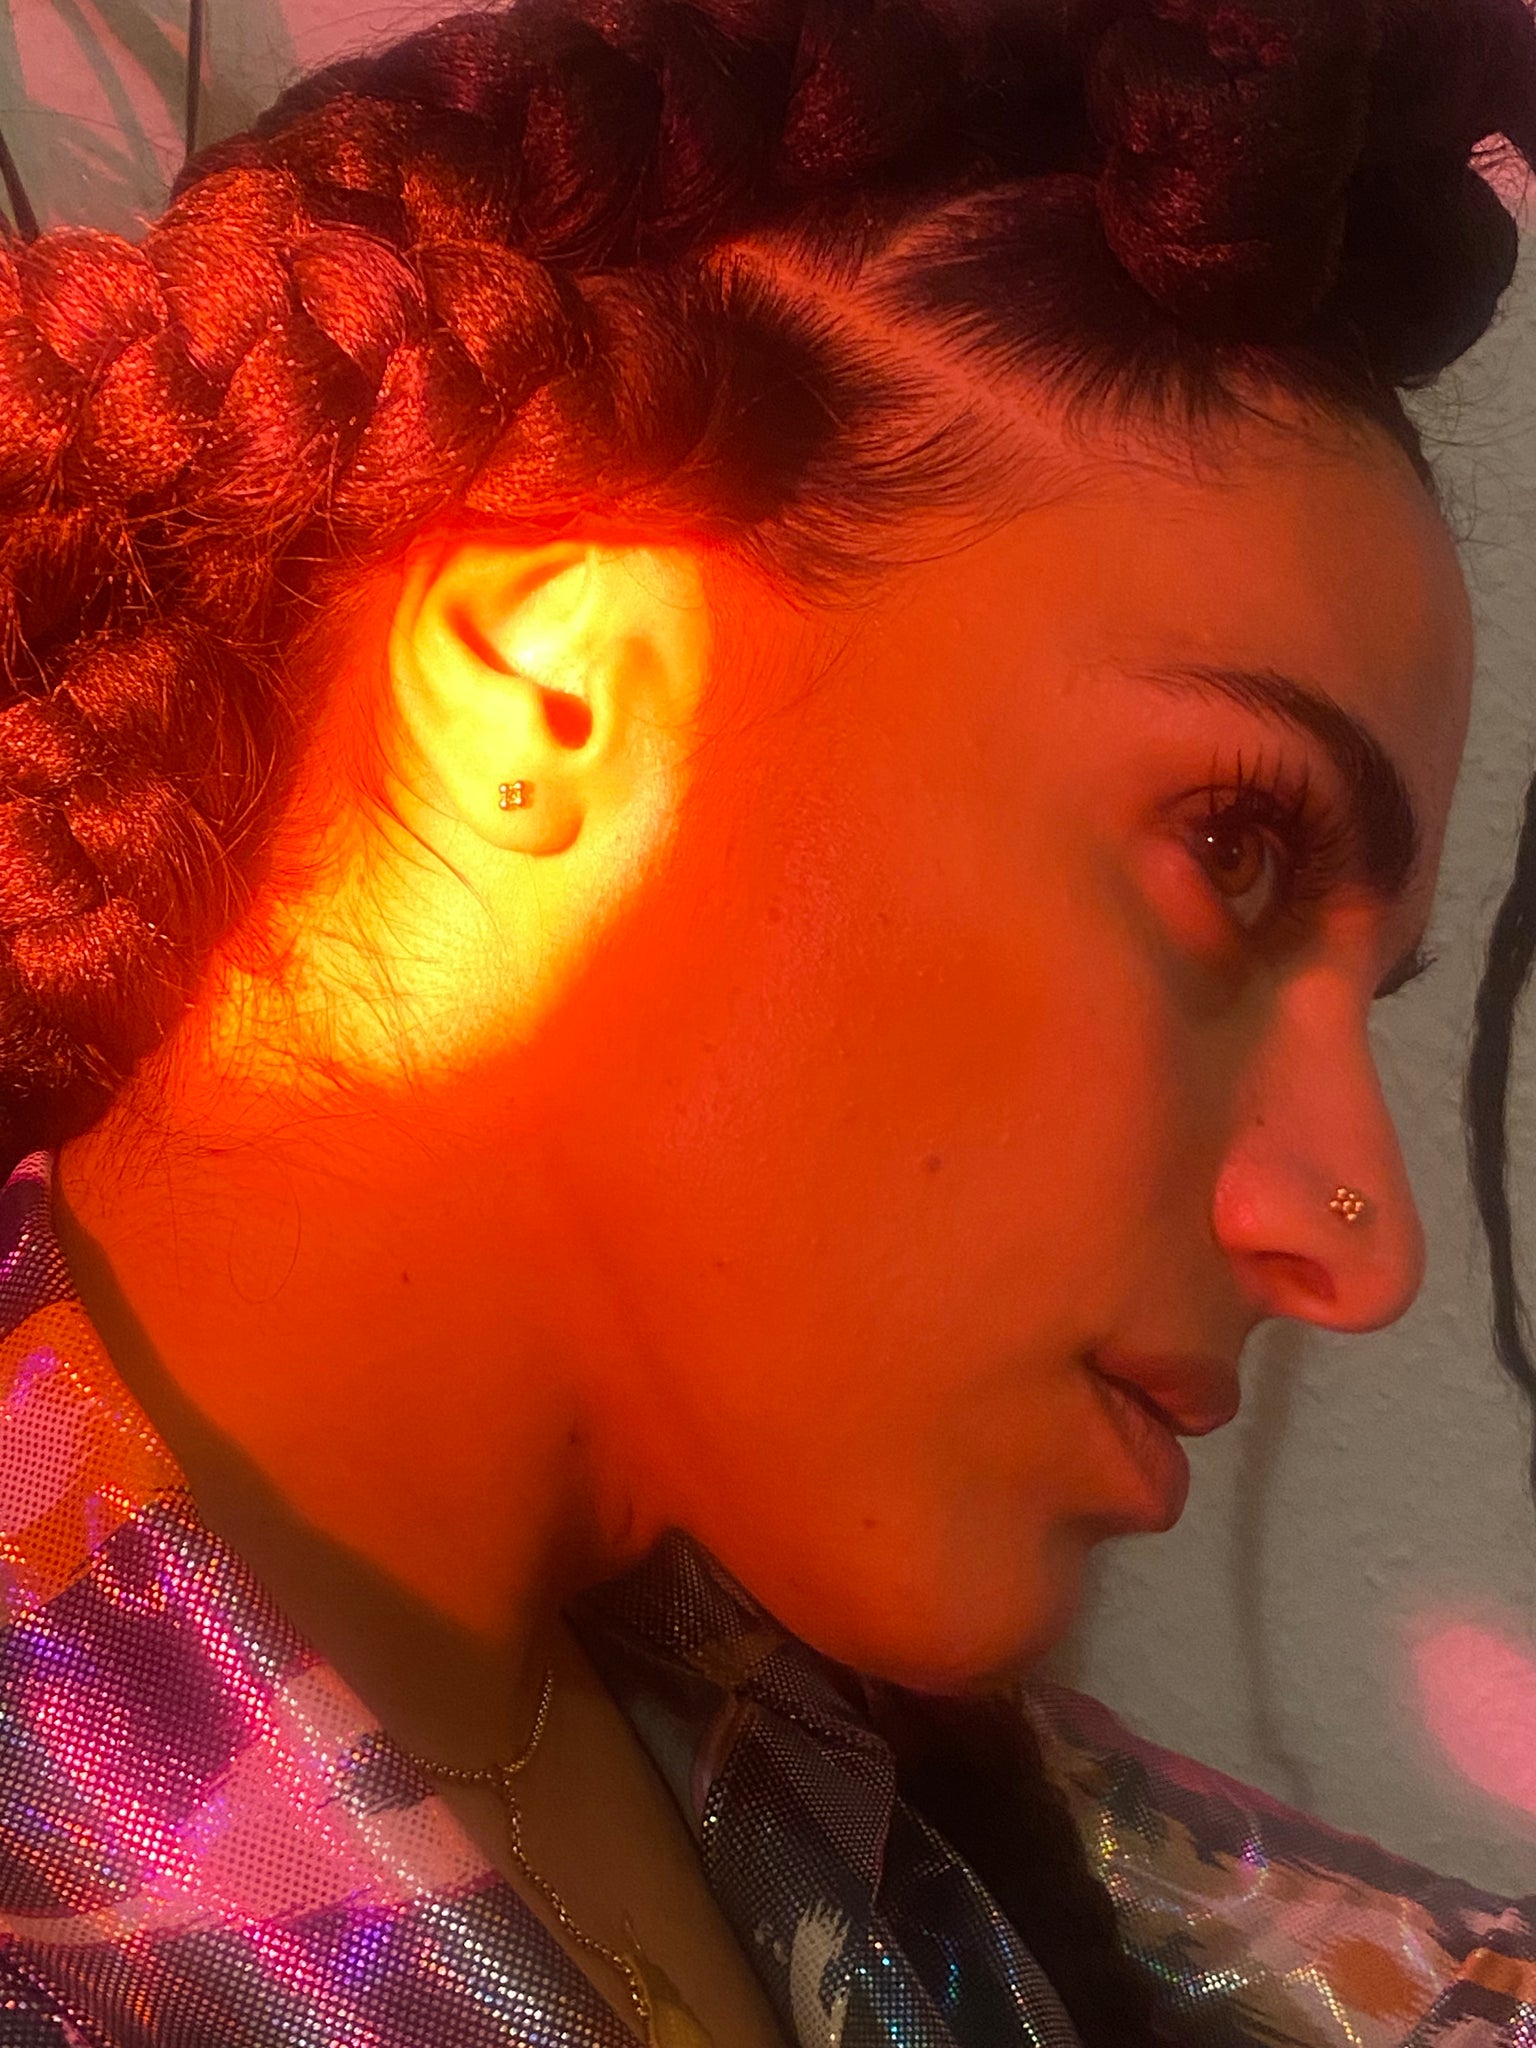 A woman with braids leans forward with a gold stud in her nose and ear.